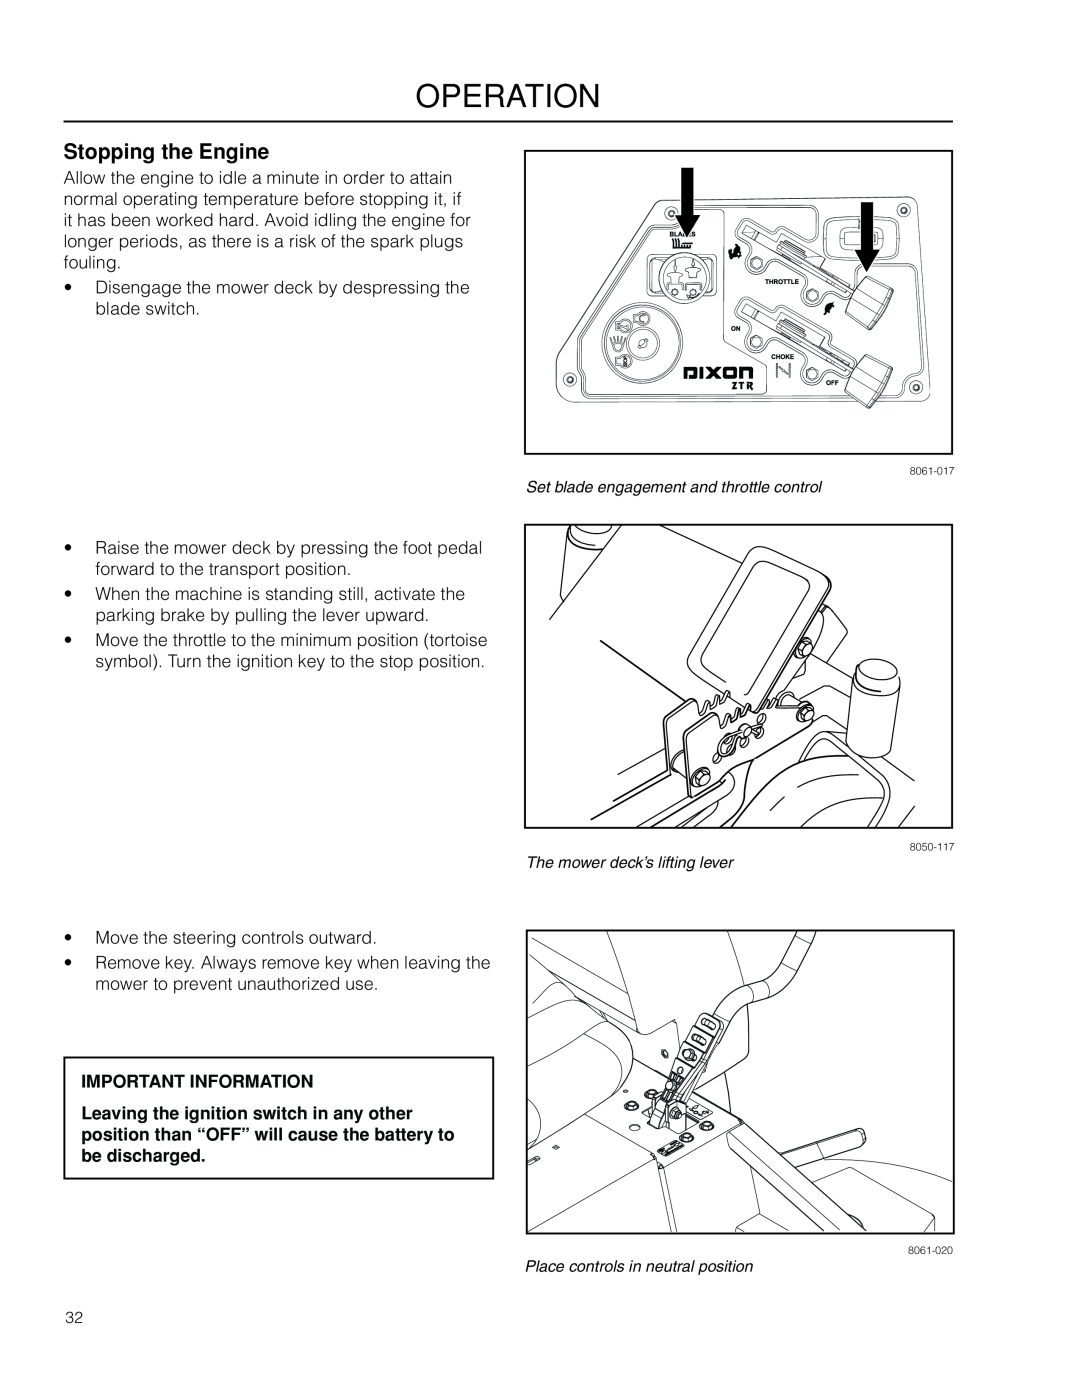 Dixon 966985402, 966985401 manual Stopping the Engine, operation, Important Information 